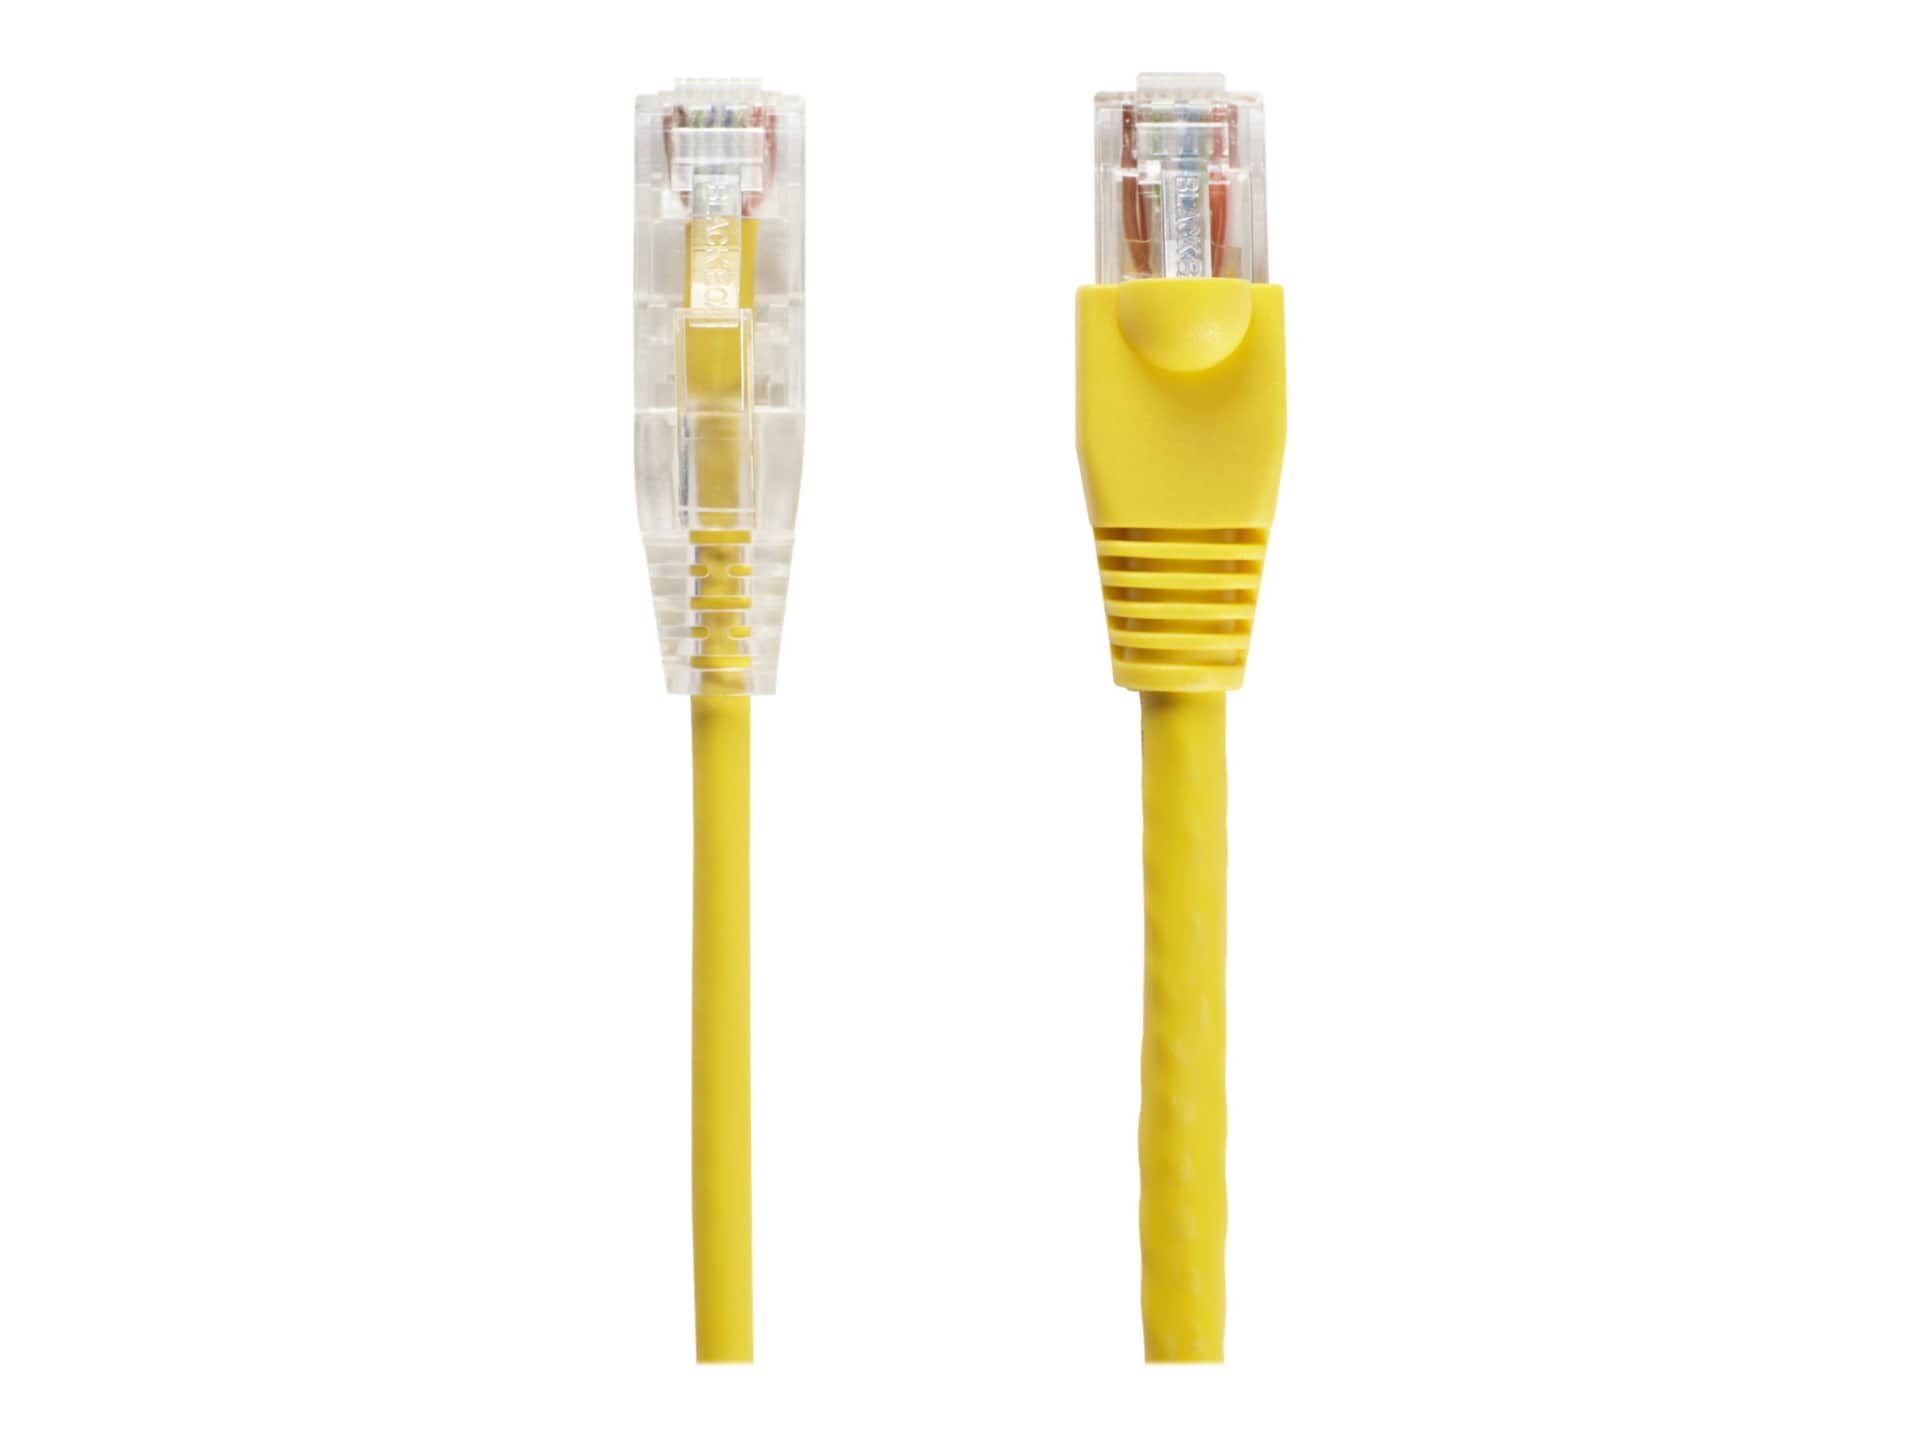 Black Box Slim-Net patch cable - 3 ft - yellow